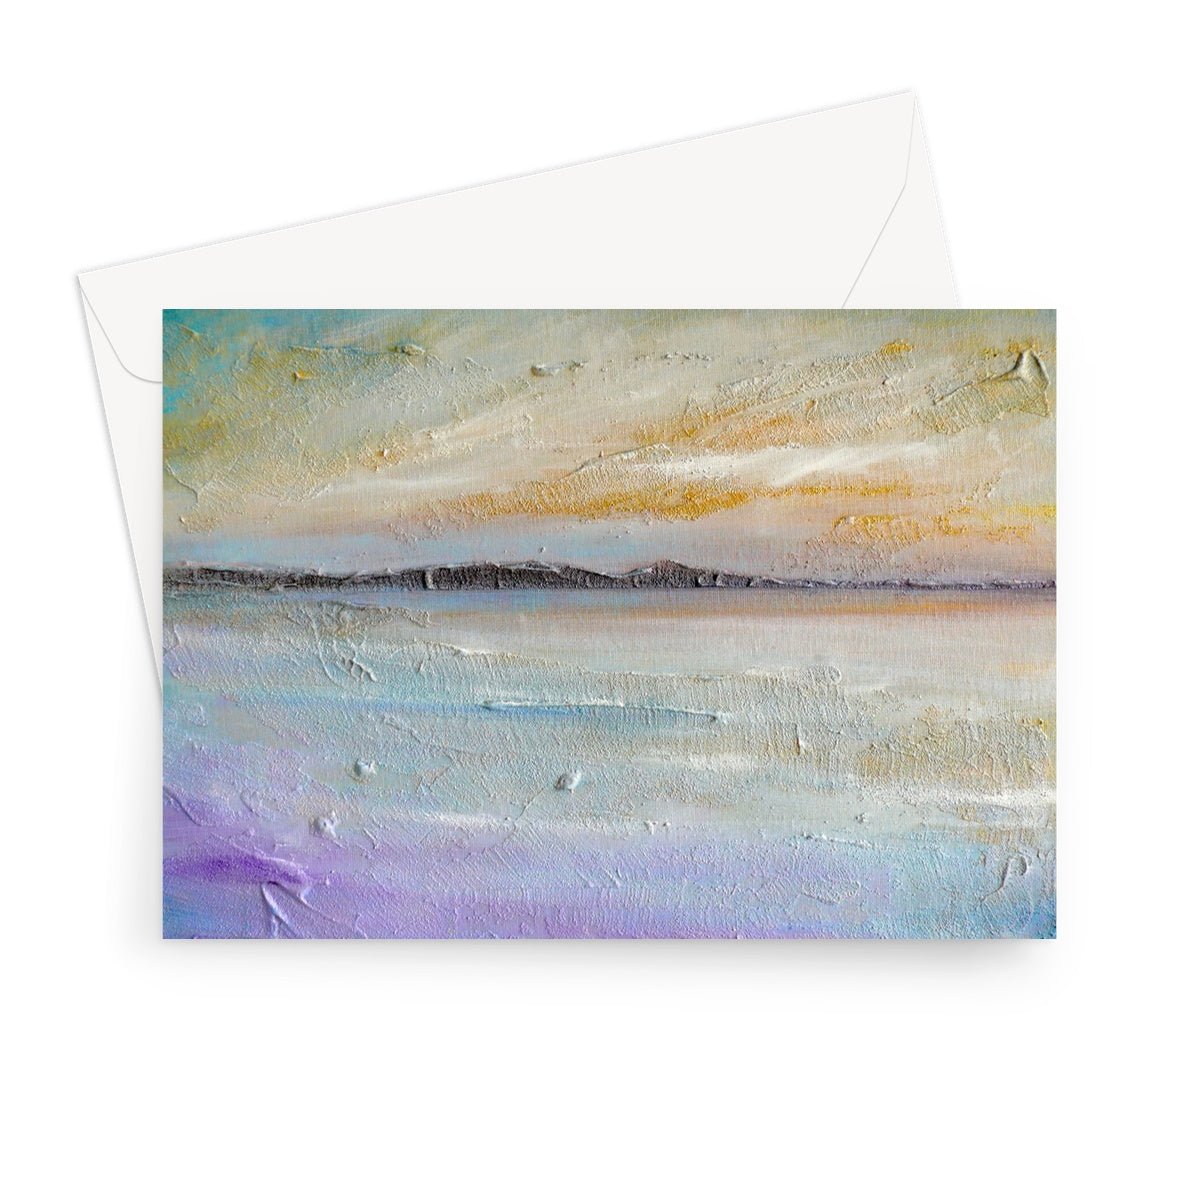 Sollas Beach South Uist Art Gifts Greeting Card-Greetings Cards-Hebridean Islands Art Gallery-7"x5"-1 Card-Paintings, Prints, Homeware, Art Gifts From Scotland By Scottish Artist Kevin Hunter